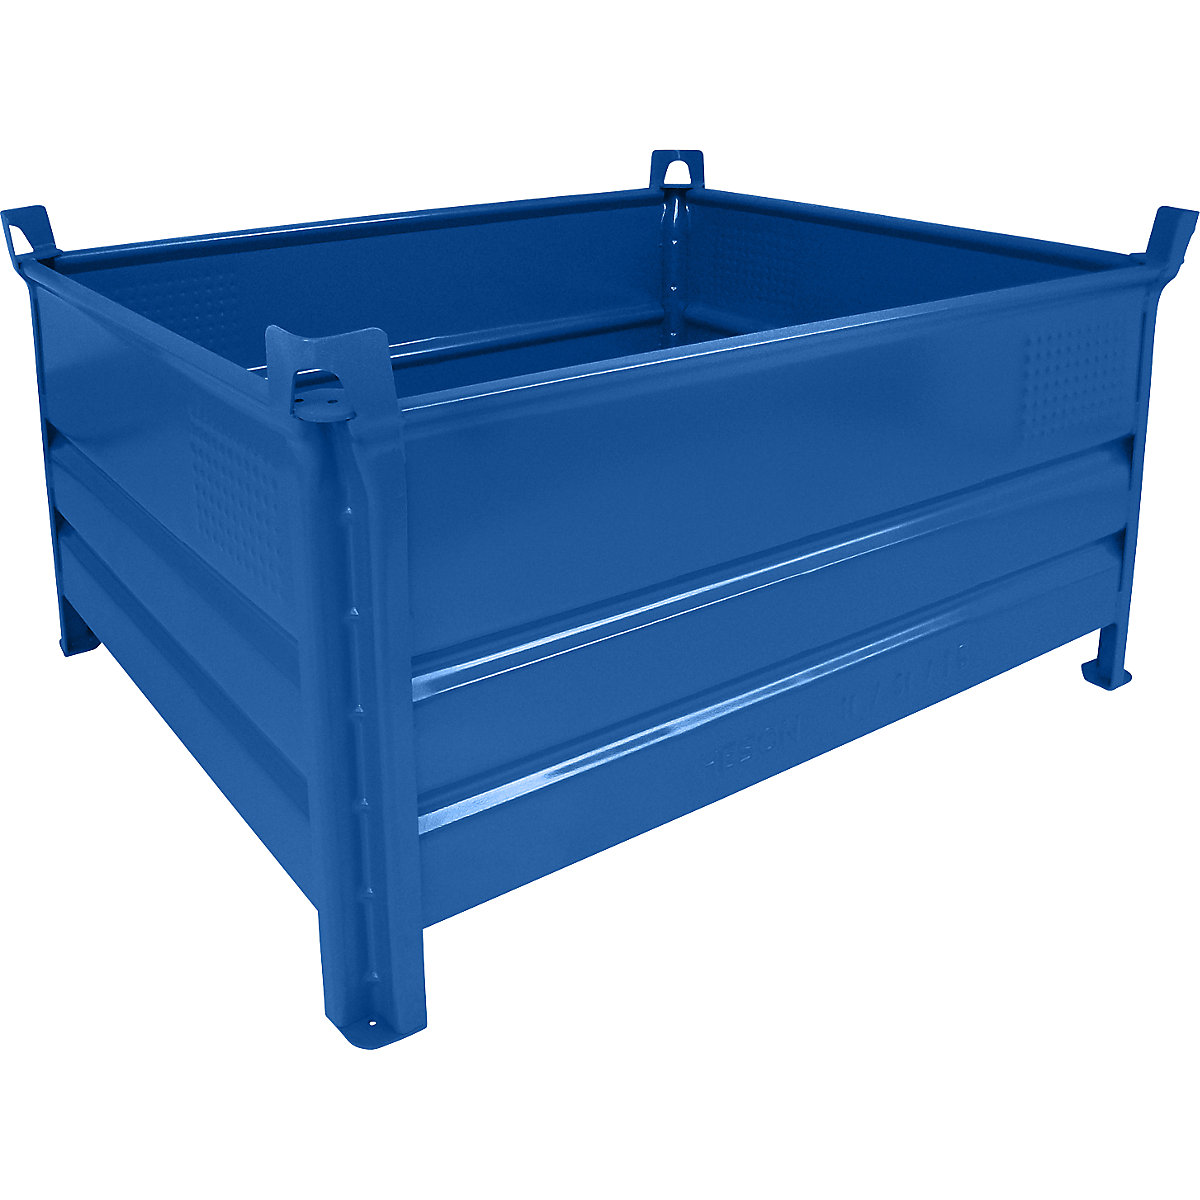 Solid panel box pallet – Heson, WxL 1000 x 1200 mm, max. load 1000 kg, blue, 1+ items-7